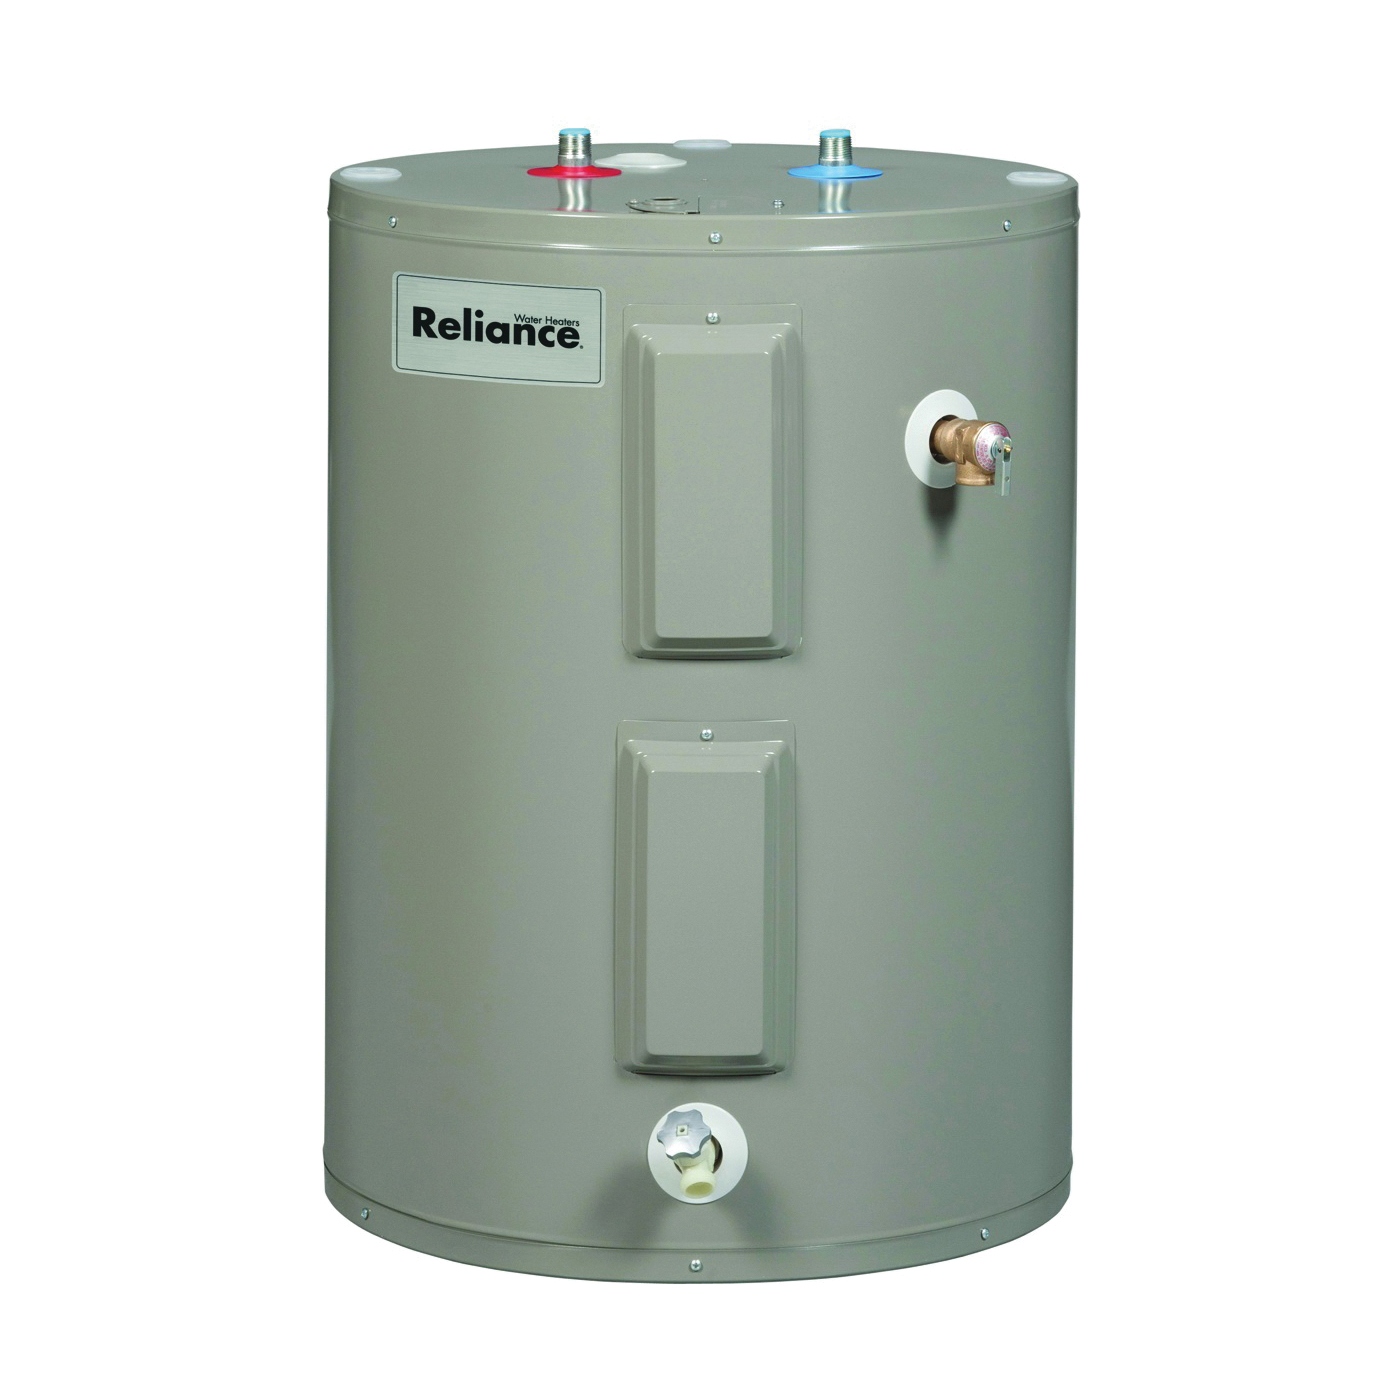 Reliance 6 50 EORS Electric Water Heater, 30 A, 240 V, 6000 W, 50 gal Tank, 92 % Energy Efficiency